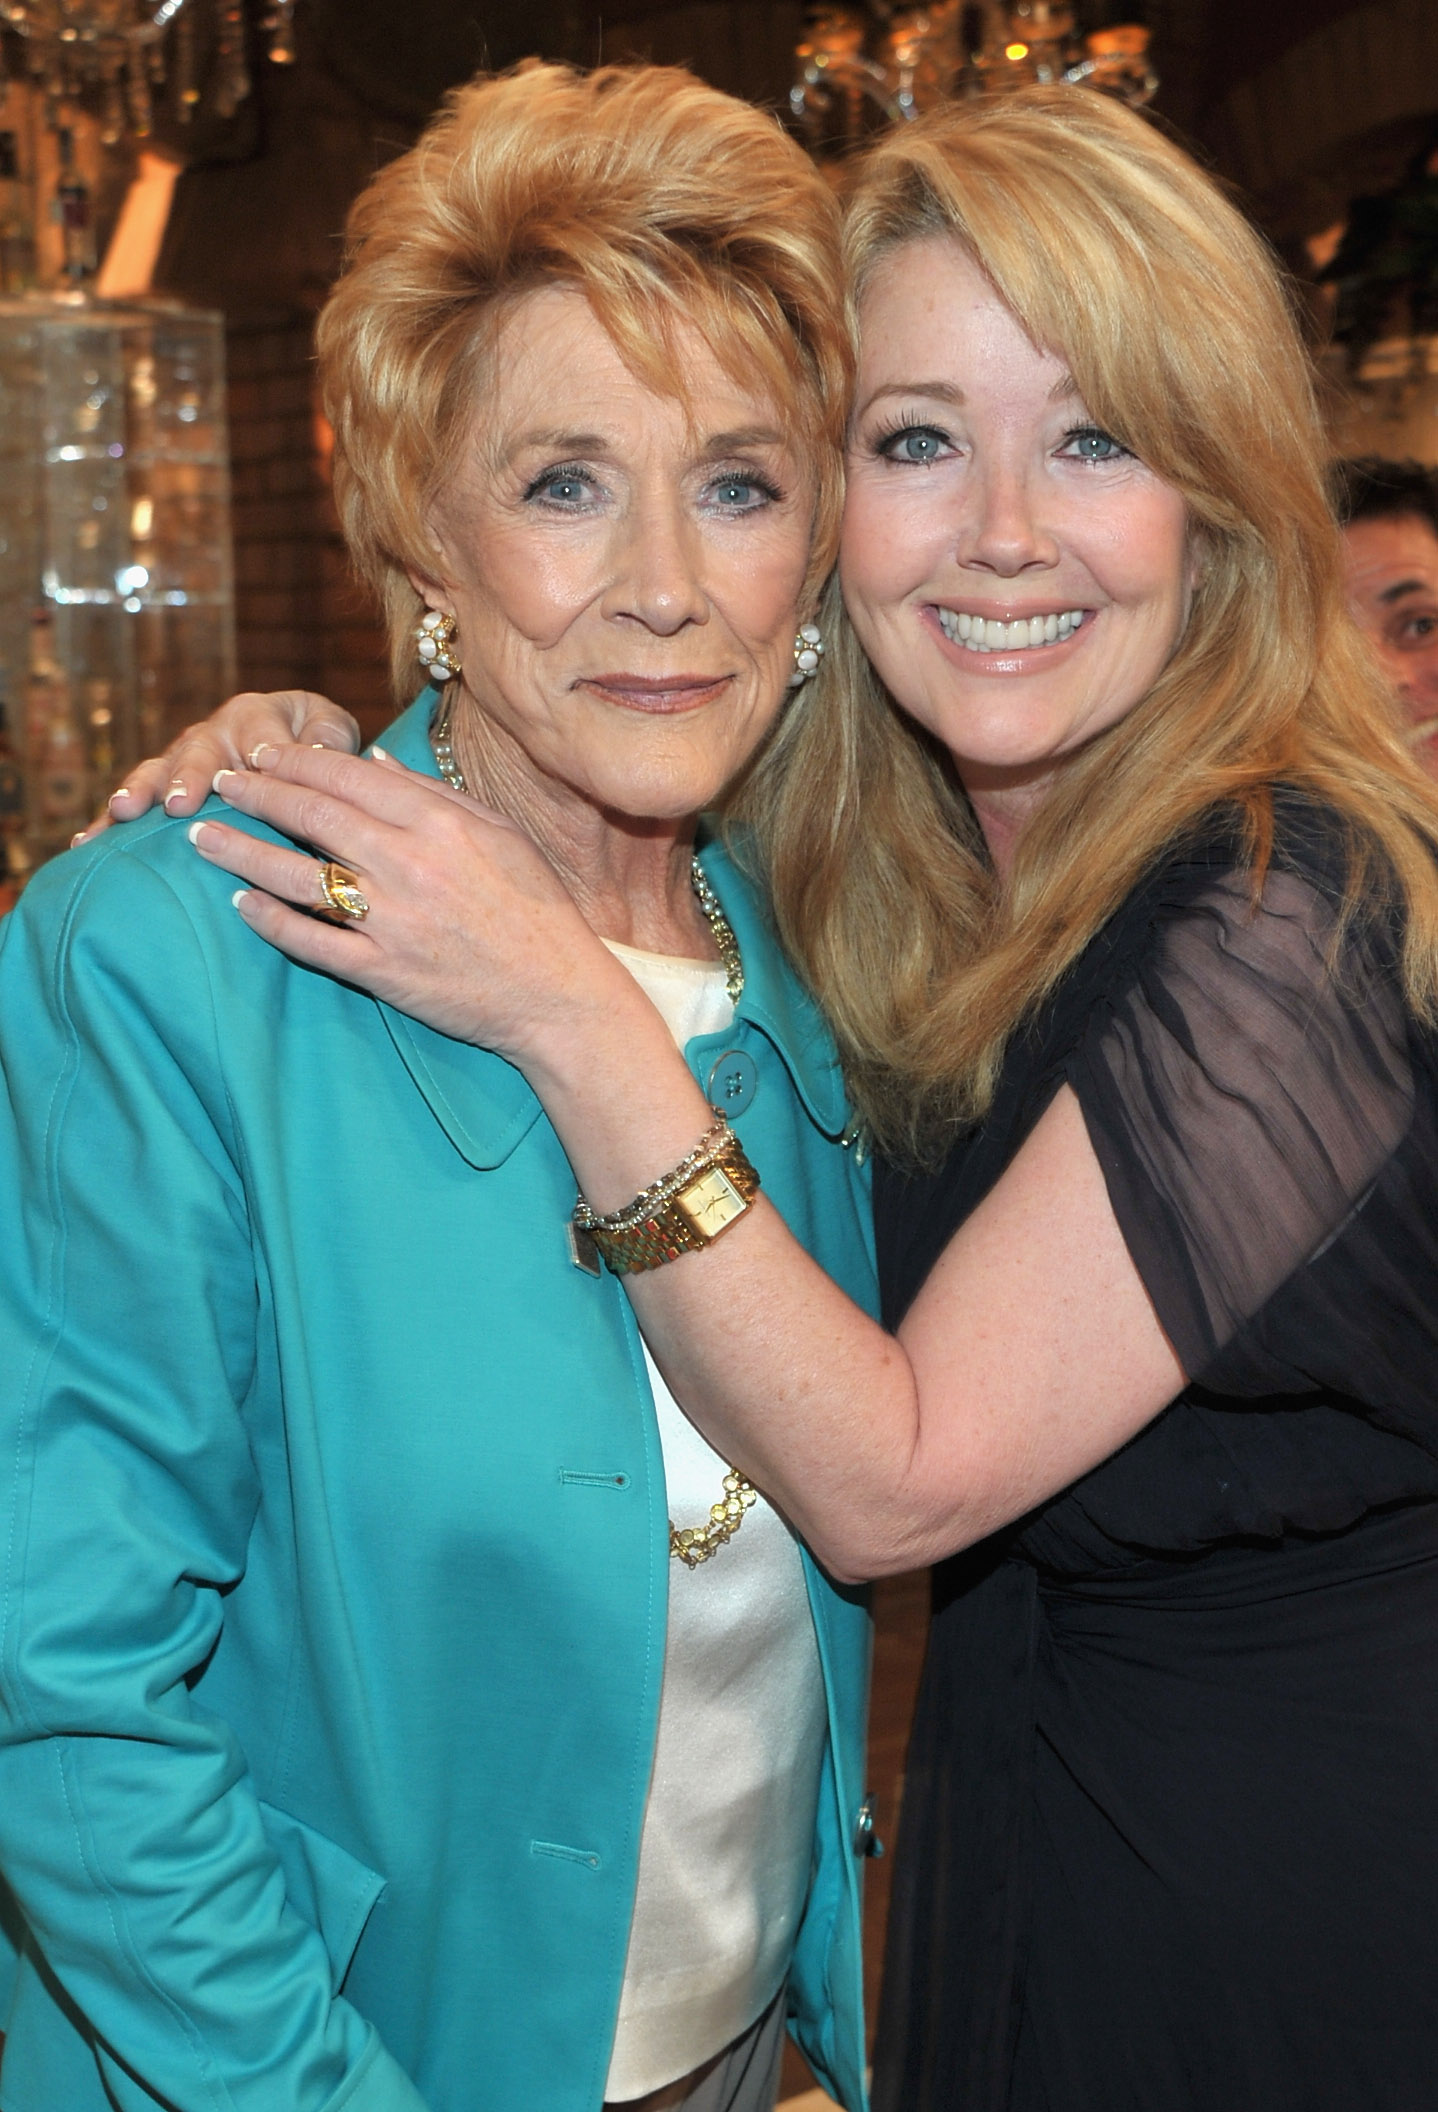 Actress Jeanne Cooper and actress Melody Thomas Scott at CBS' "The Young and the Restless" 38th Anniversary cake cutting on March 24, 2011 in Los Angeles, California | Source: Getty Images